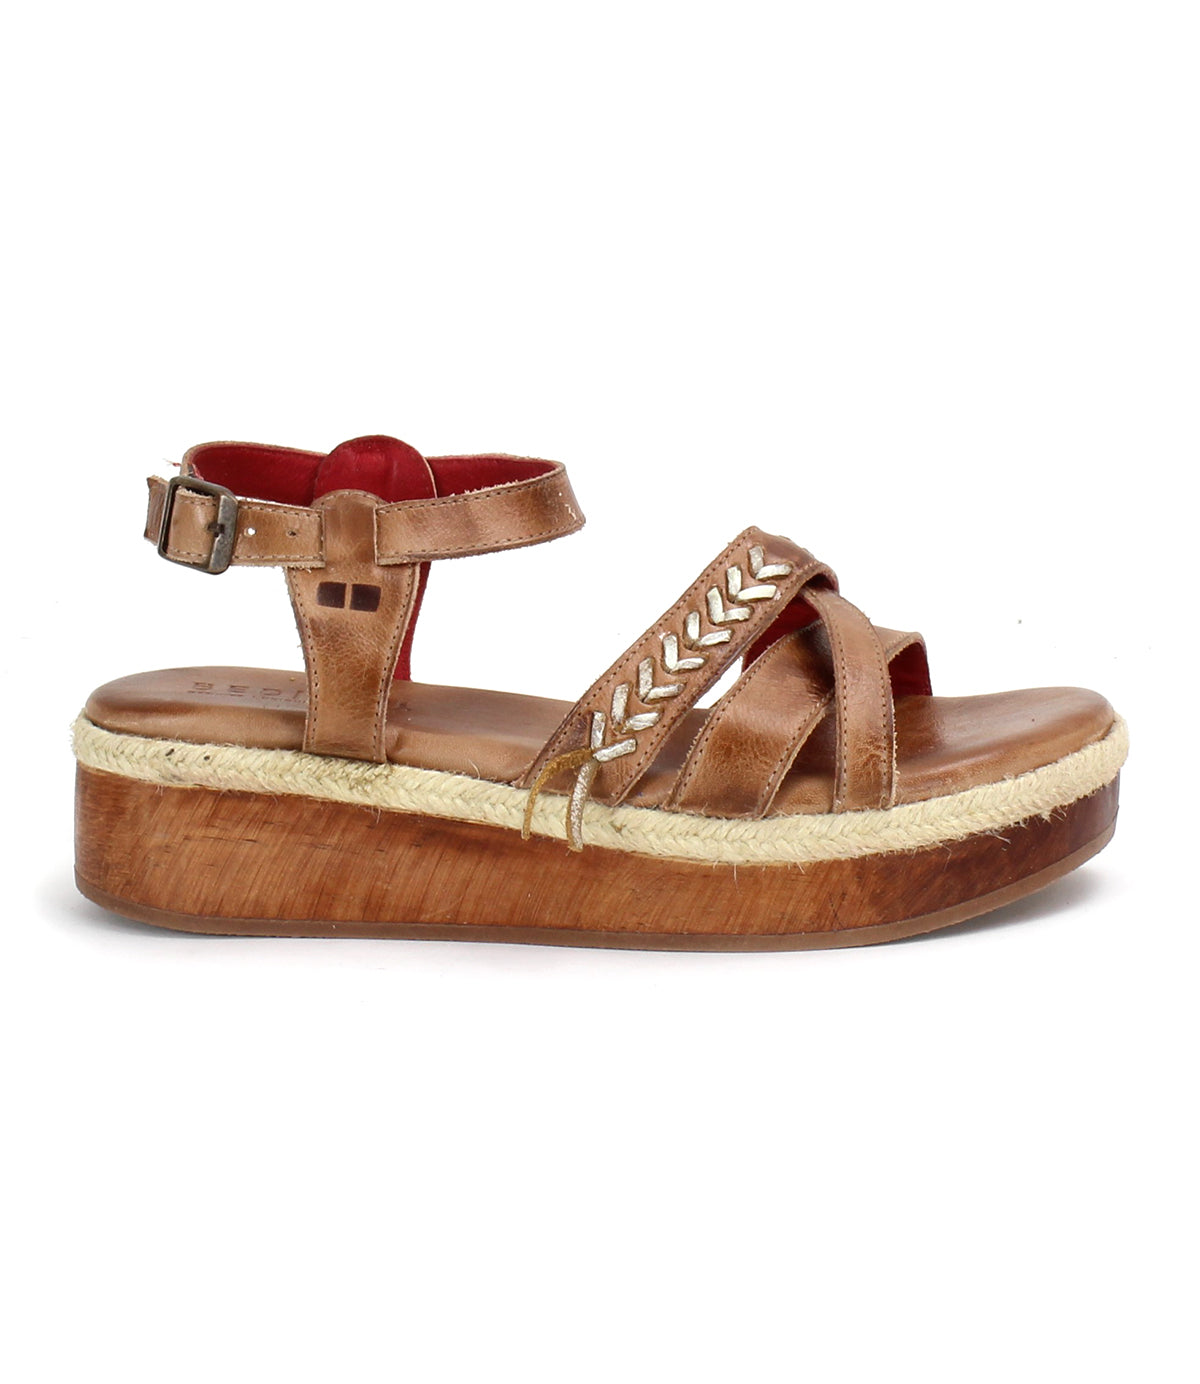 Women's stylish brown strappy sandal with a cork platform sole from Bed Stu Necessary.